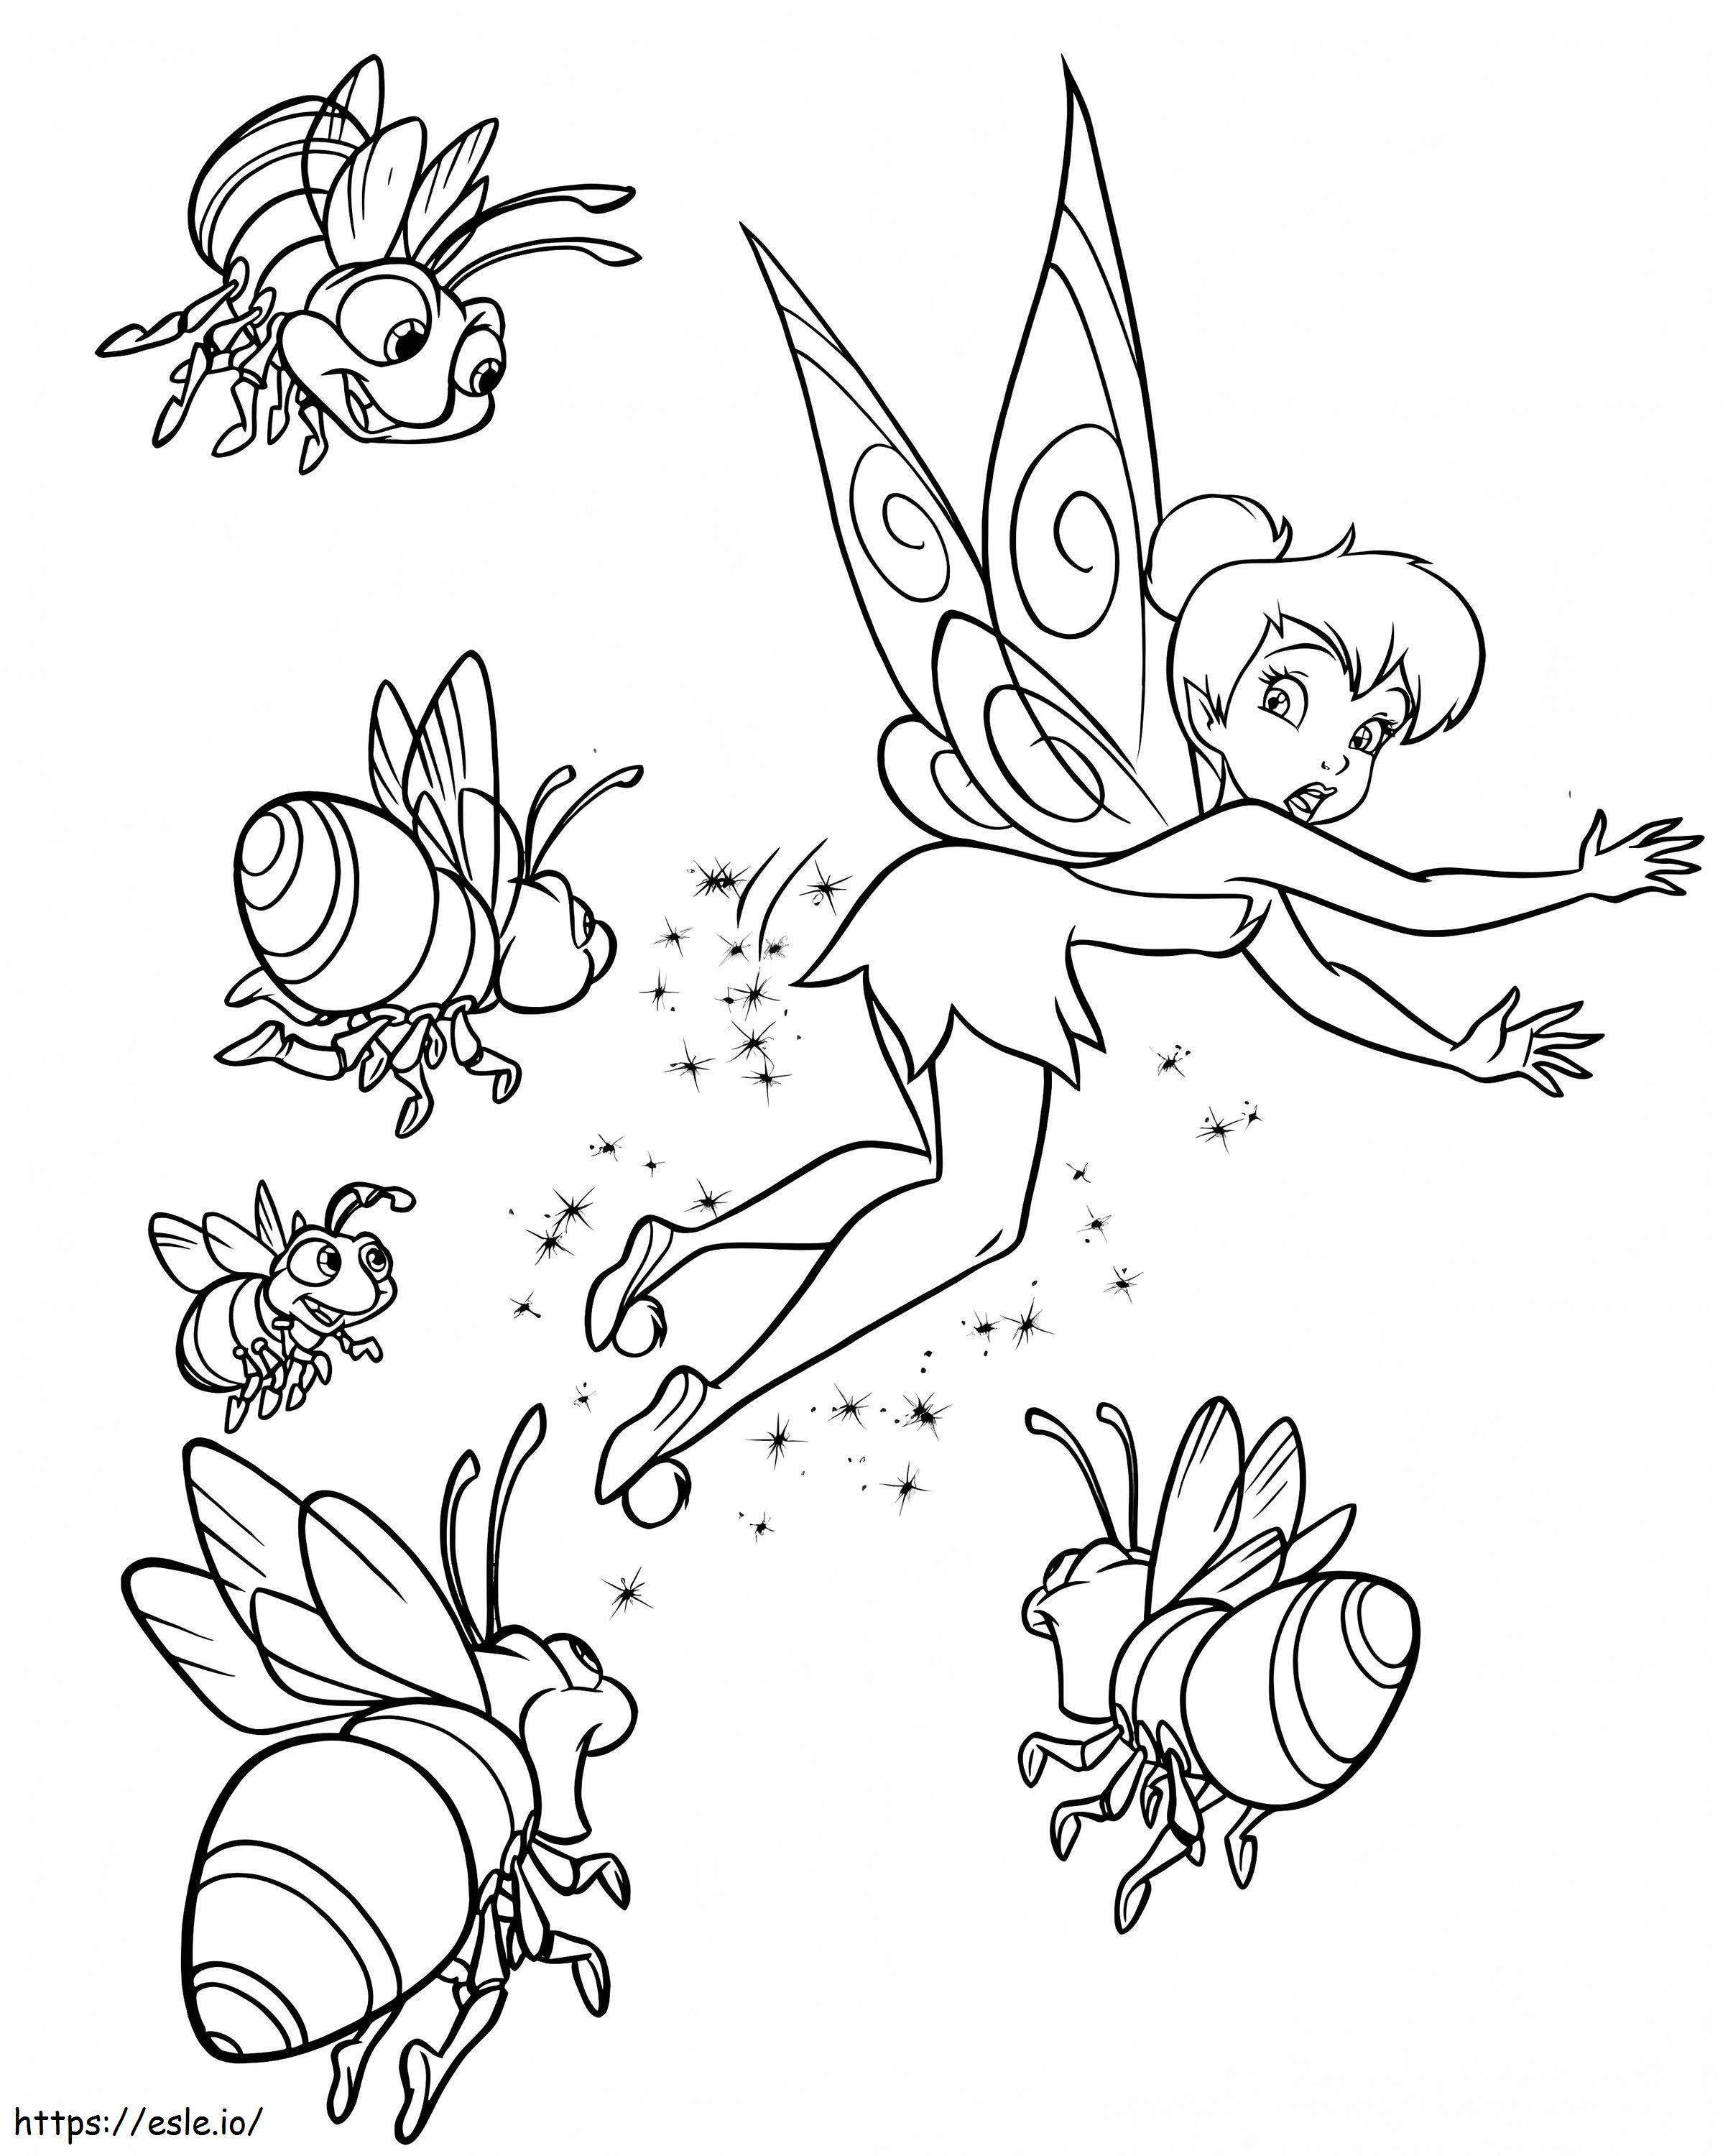 TinkerBell And Firefly coloring page